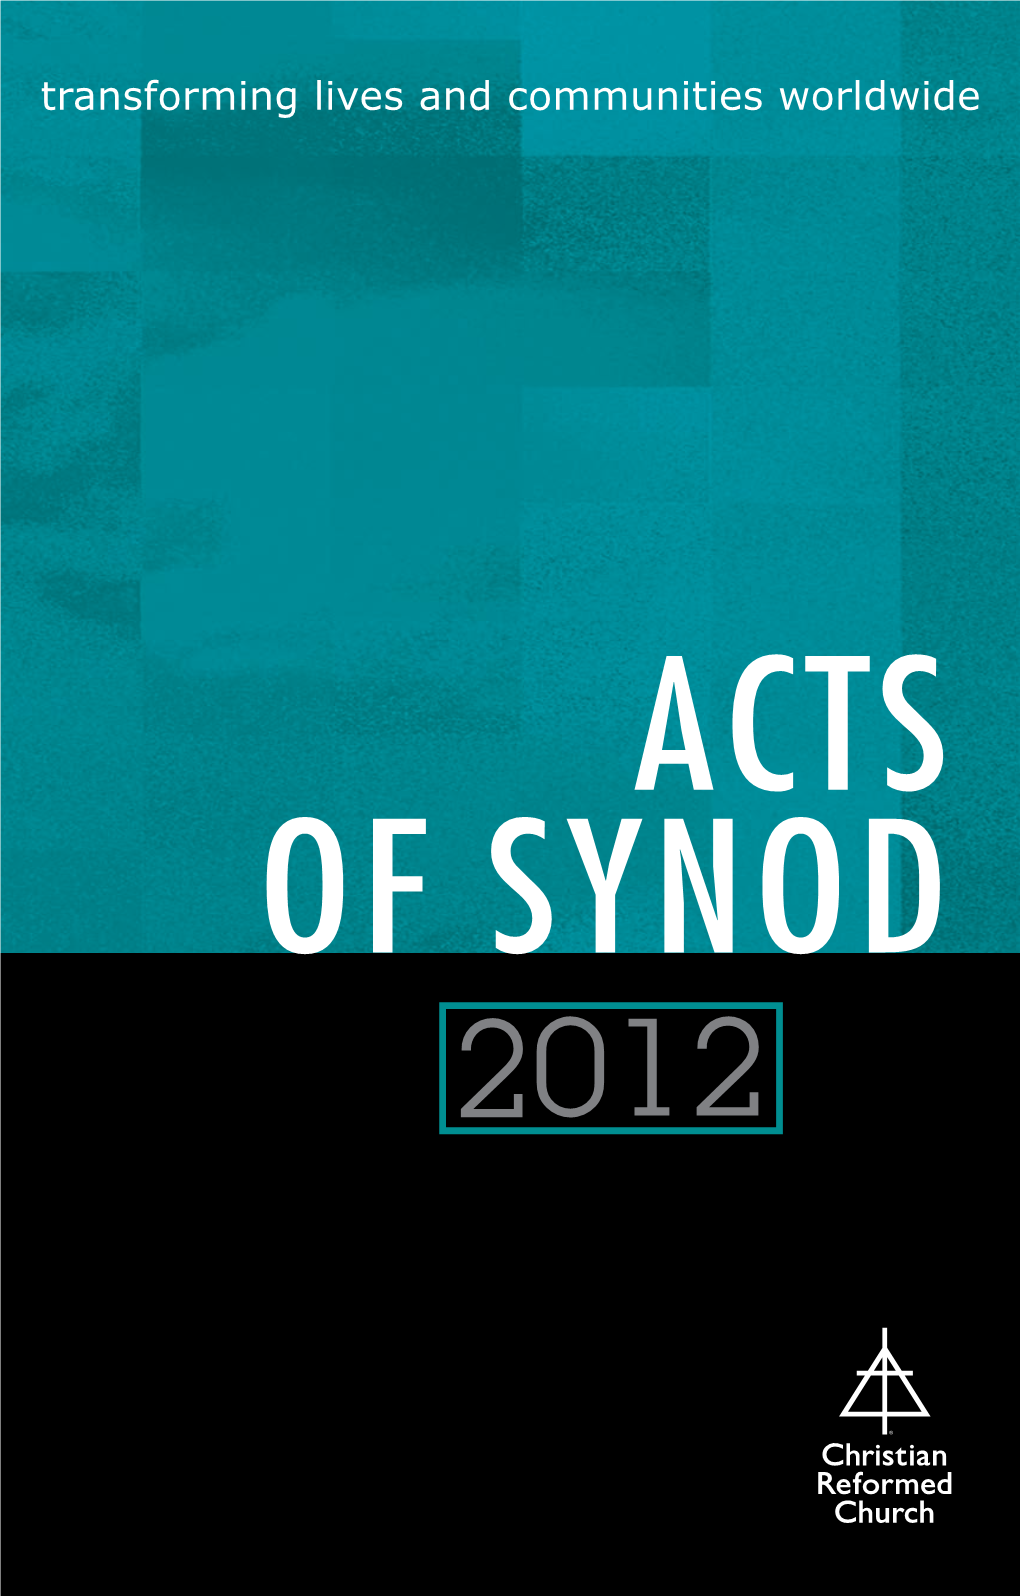 Acts of Synod 2 012 2012 Transforming Lives and Communities Worldwide